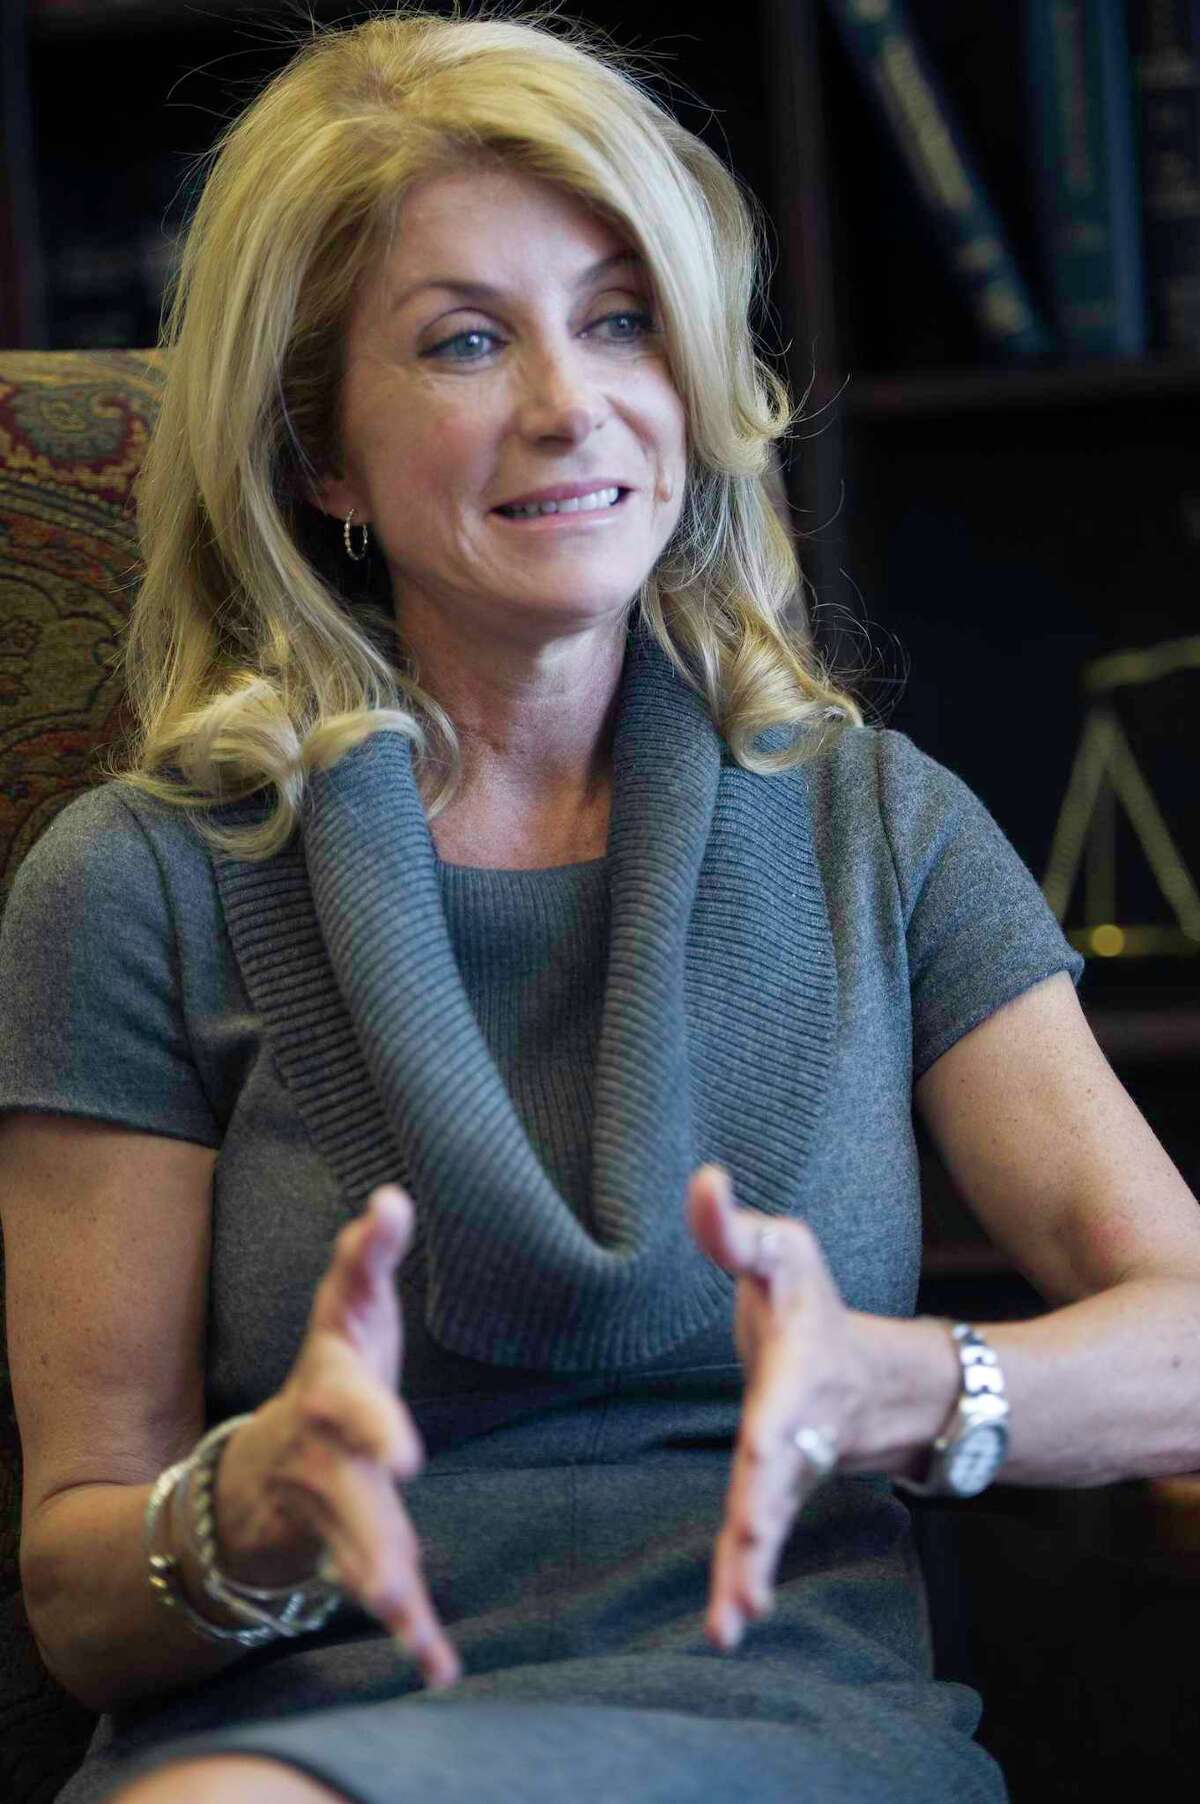 Texas State Senator Wendy Davis speaks to the San Antonio Express News about her unsuccessful bid for governor in this year's gubernatorial election and what she plans to do moving forward on Monday, December 29, 2014 in Austin, Texas.